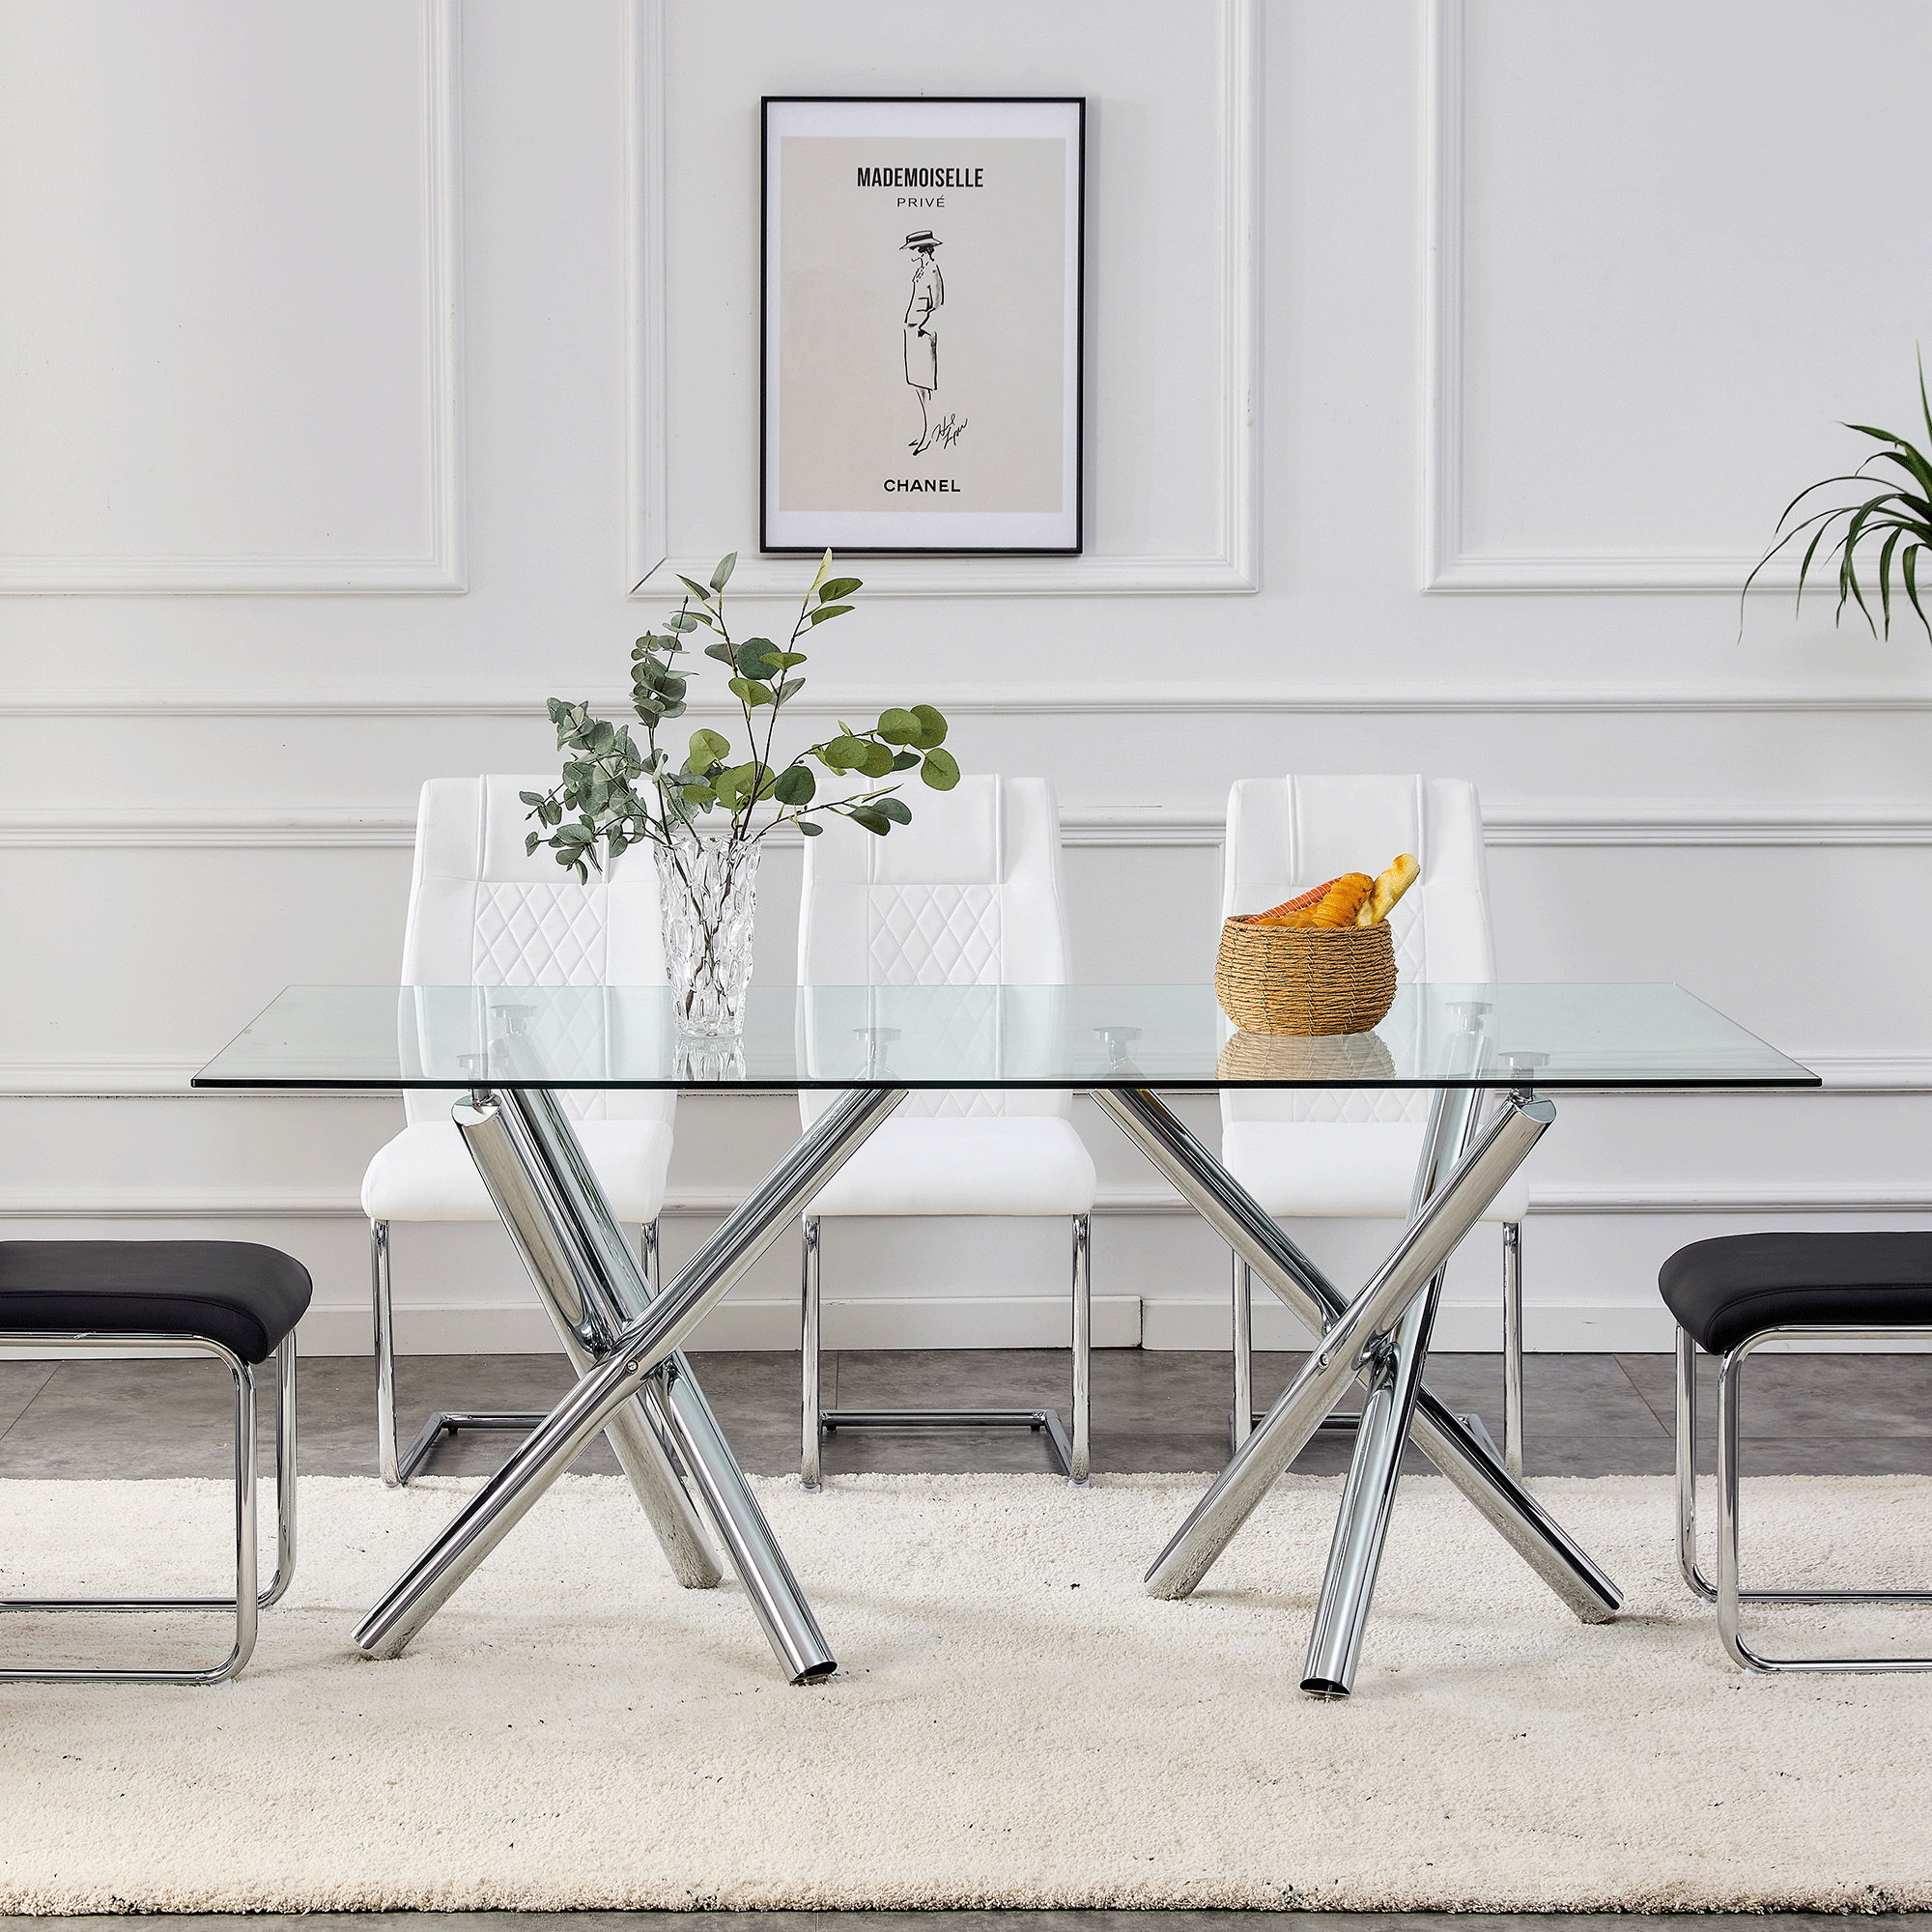 Modern Minimalist Rectangular Glass Dining Table for 6-8 with 0.39" Tempered Glass Tabletop and Silver Chrome Metal Legs